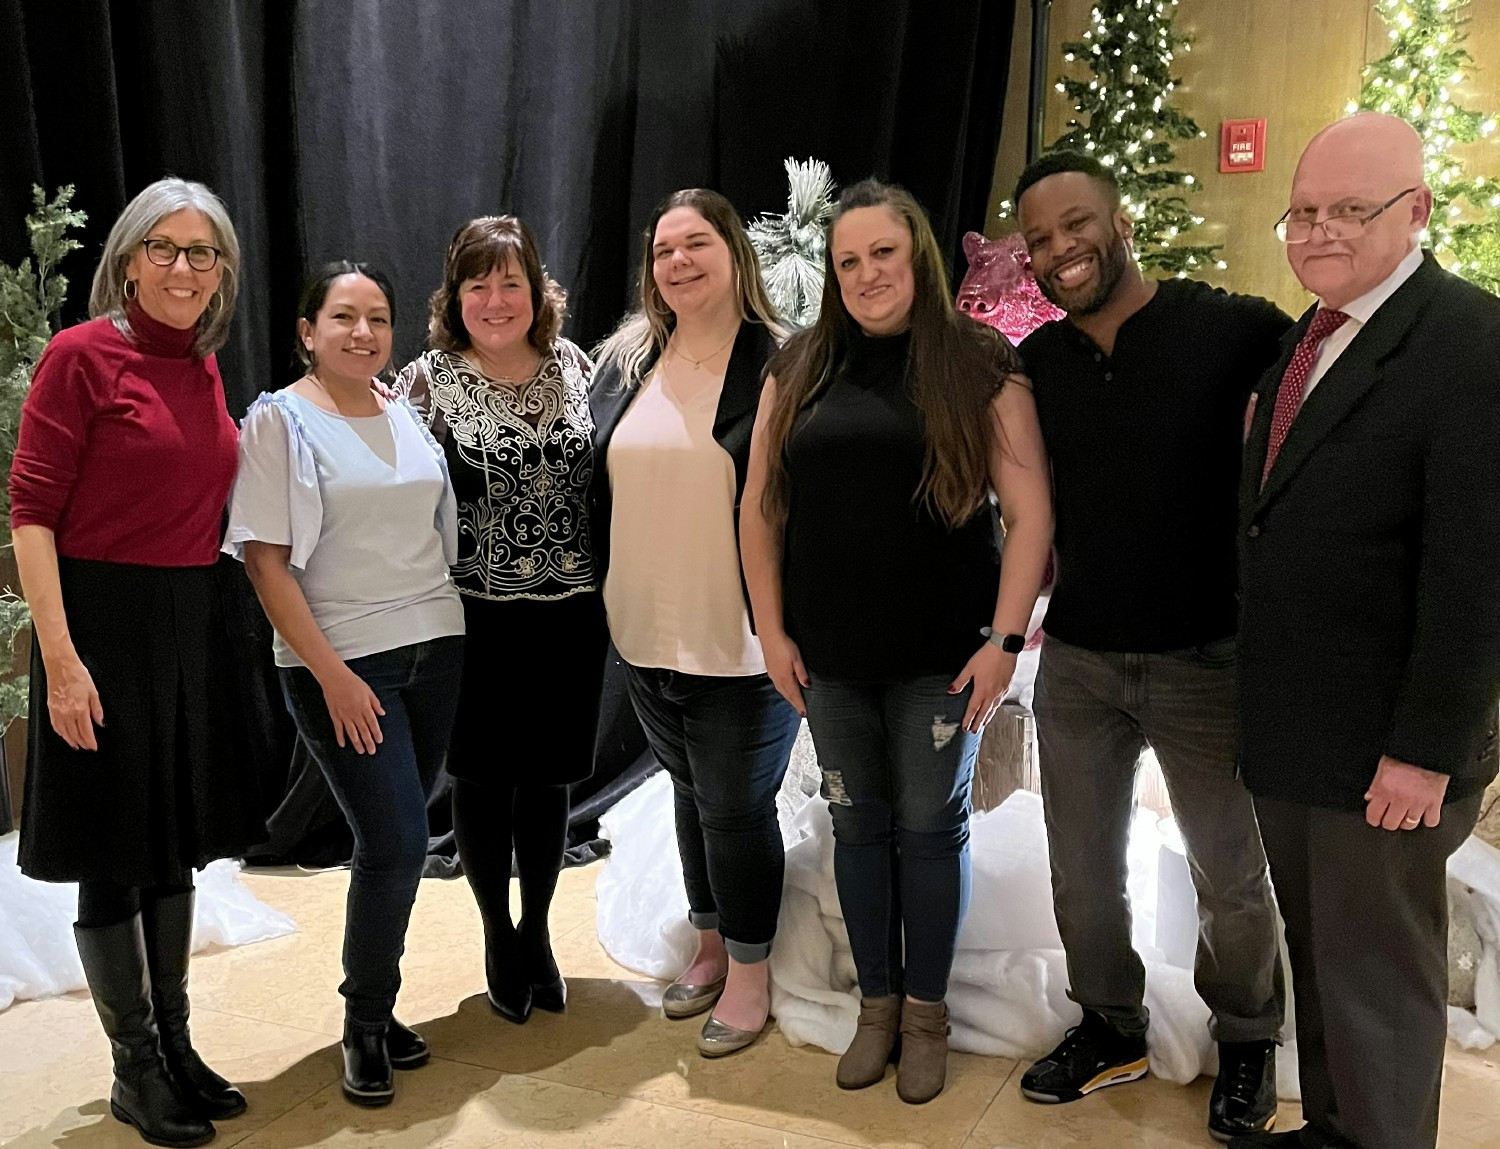 Our Chicago clinic team celebrating at their holiday party!